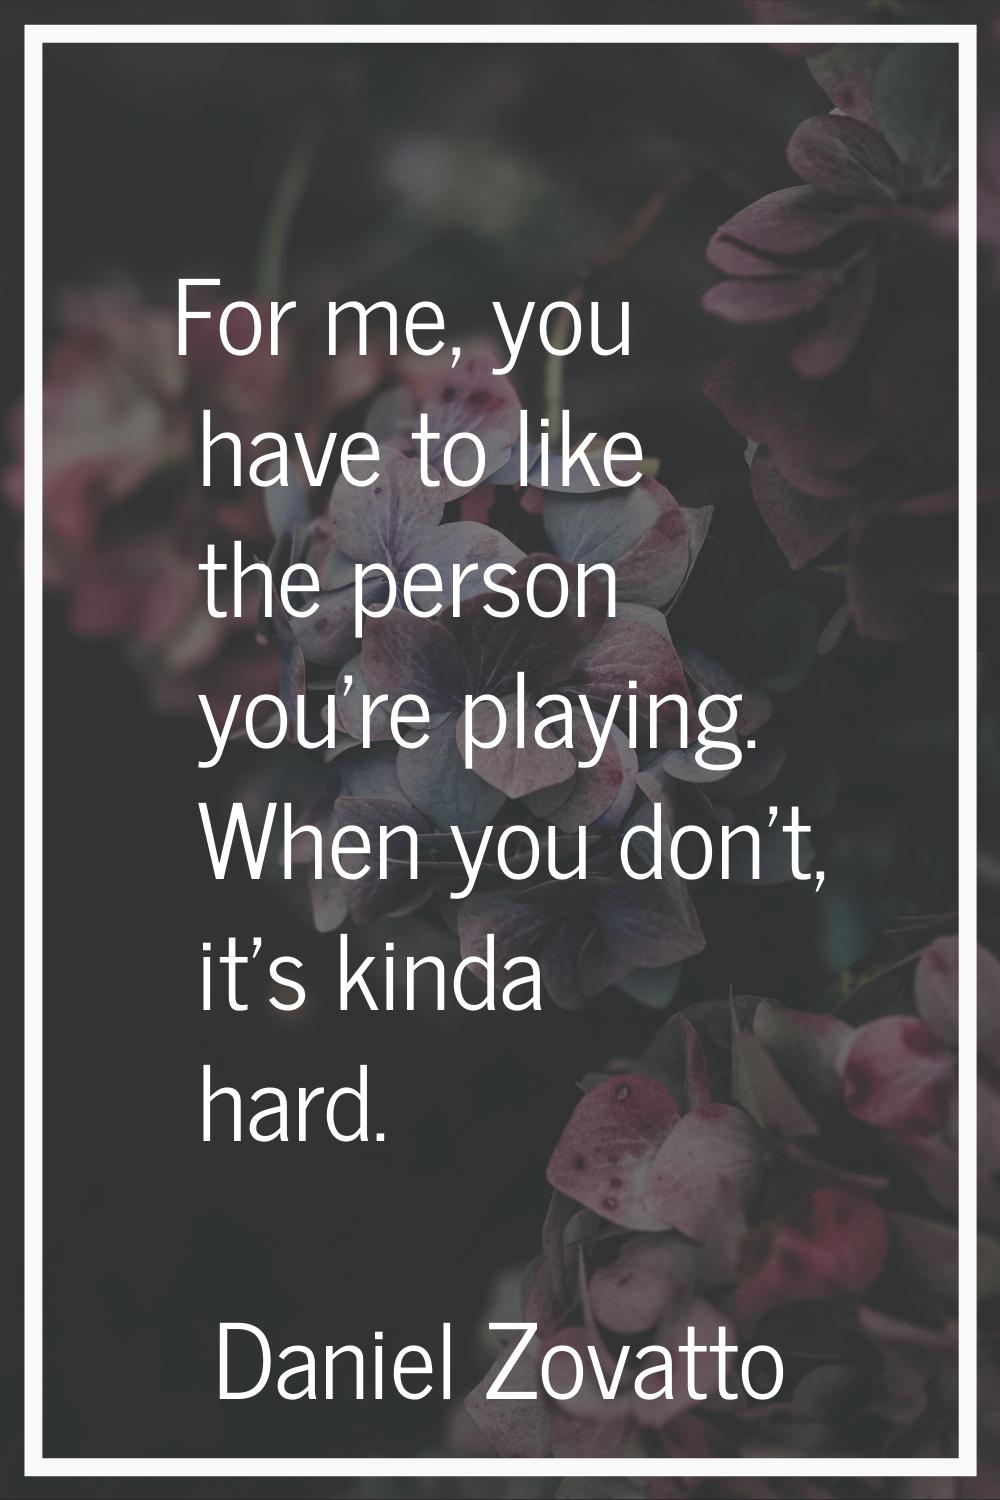 For me, you have to like the person you're playing. When you don't, it's kinda hard.